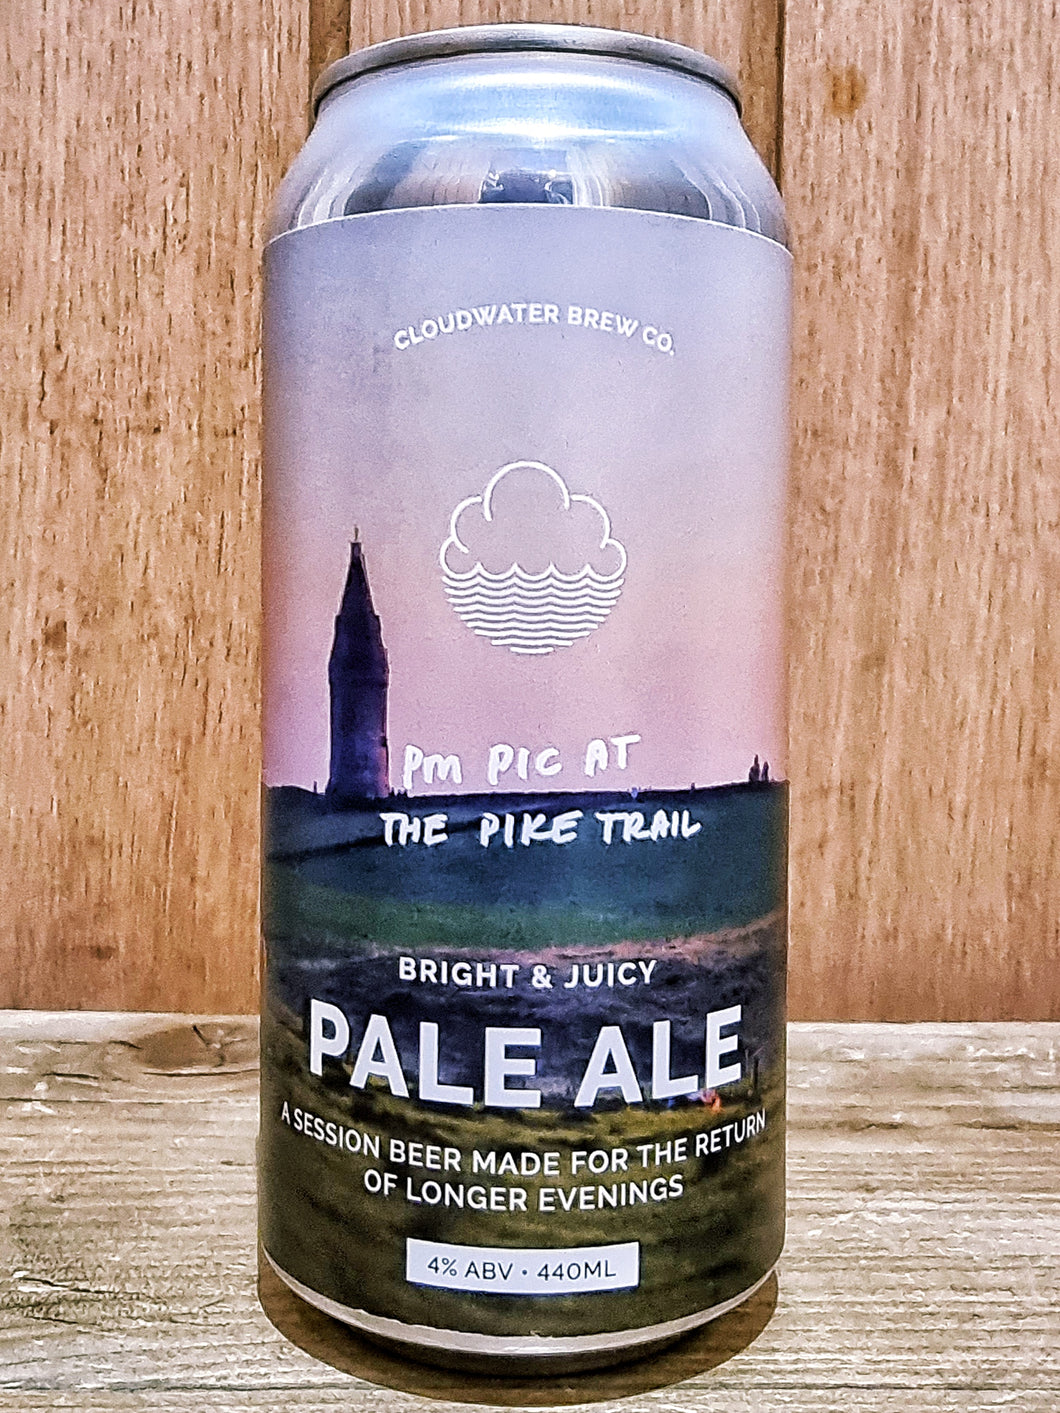 Cloudwater - PM Pic At The Pike Trail